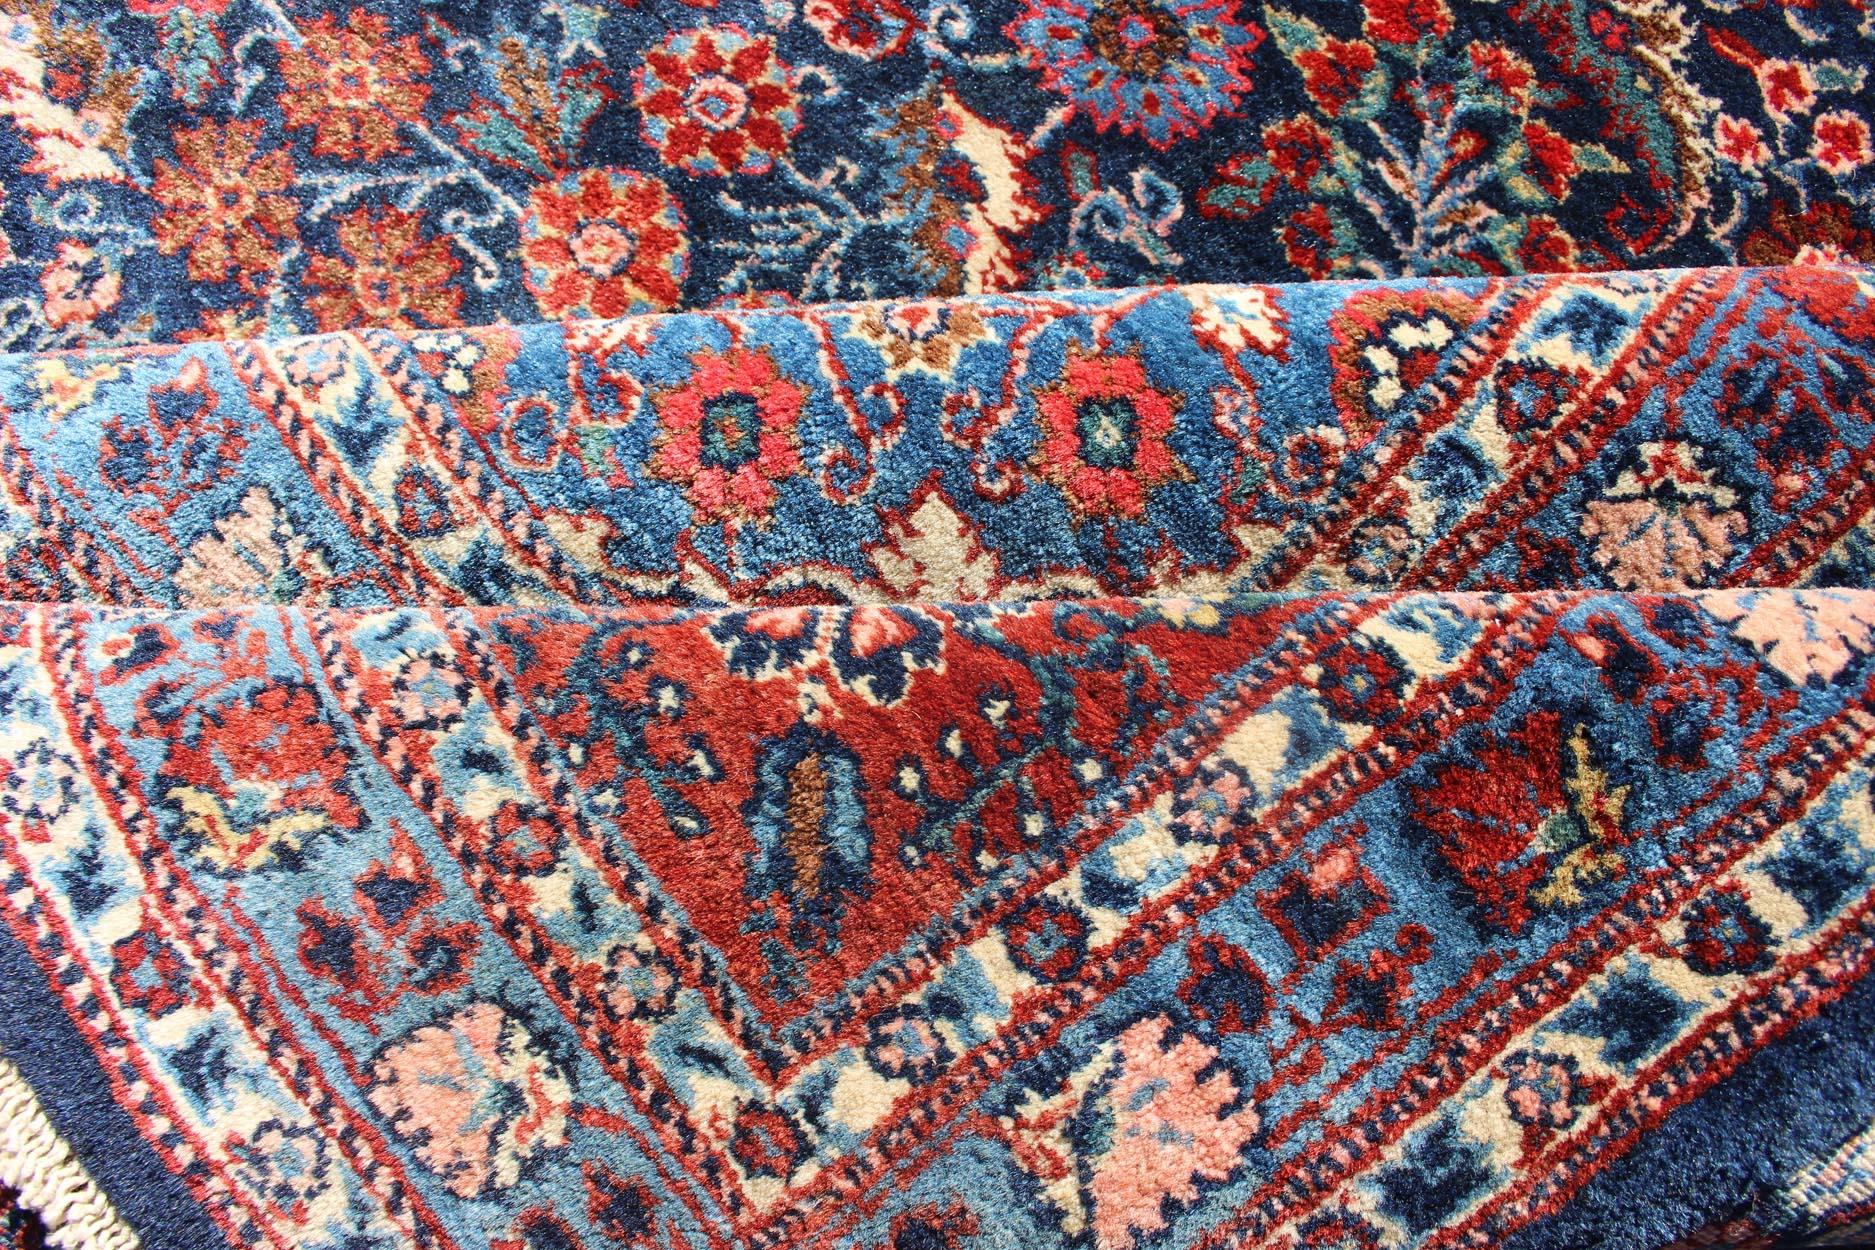 Antique Tribal Medallion Josan Rug with Jewel Tones with Center Medallion For Sale 4